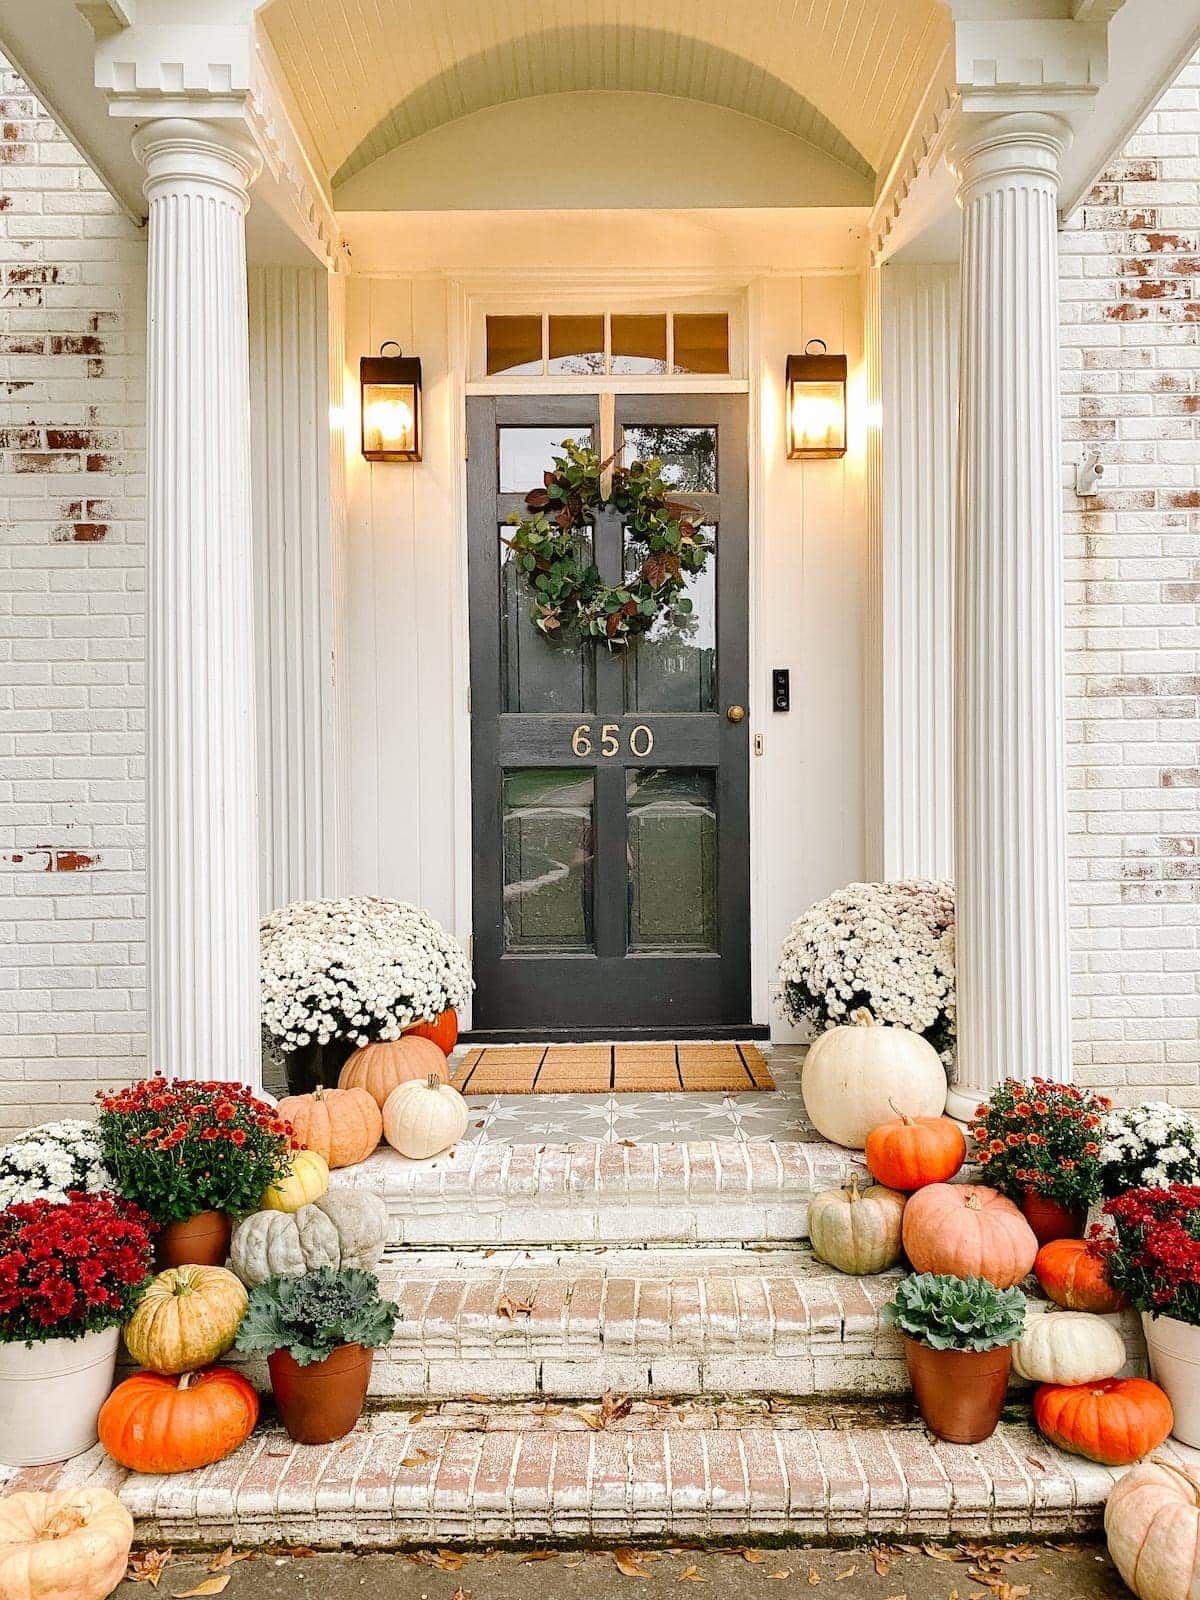 Colorful Fall Design in A Small Stoop